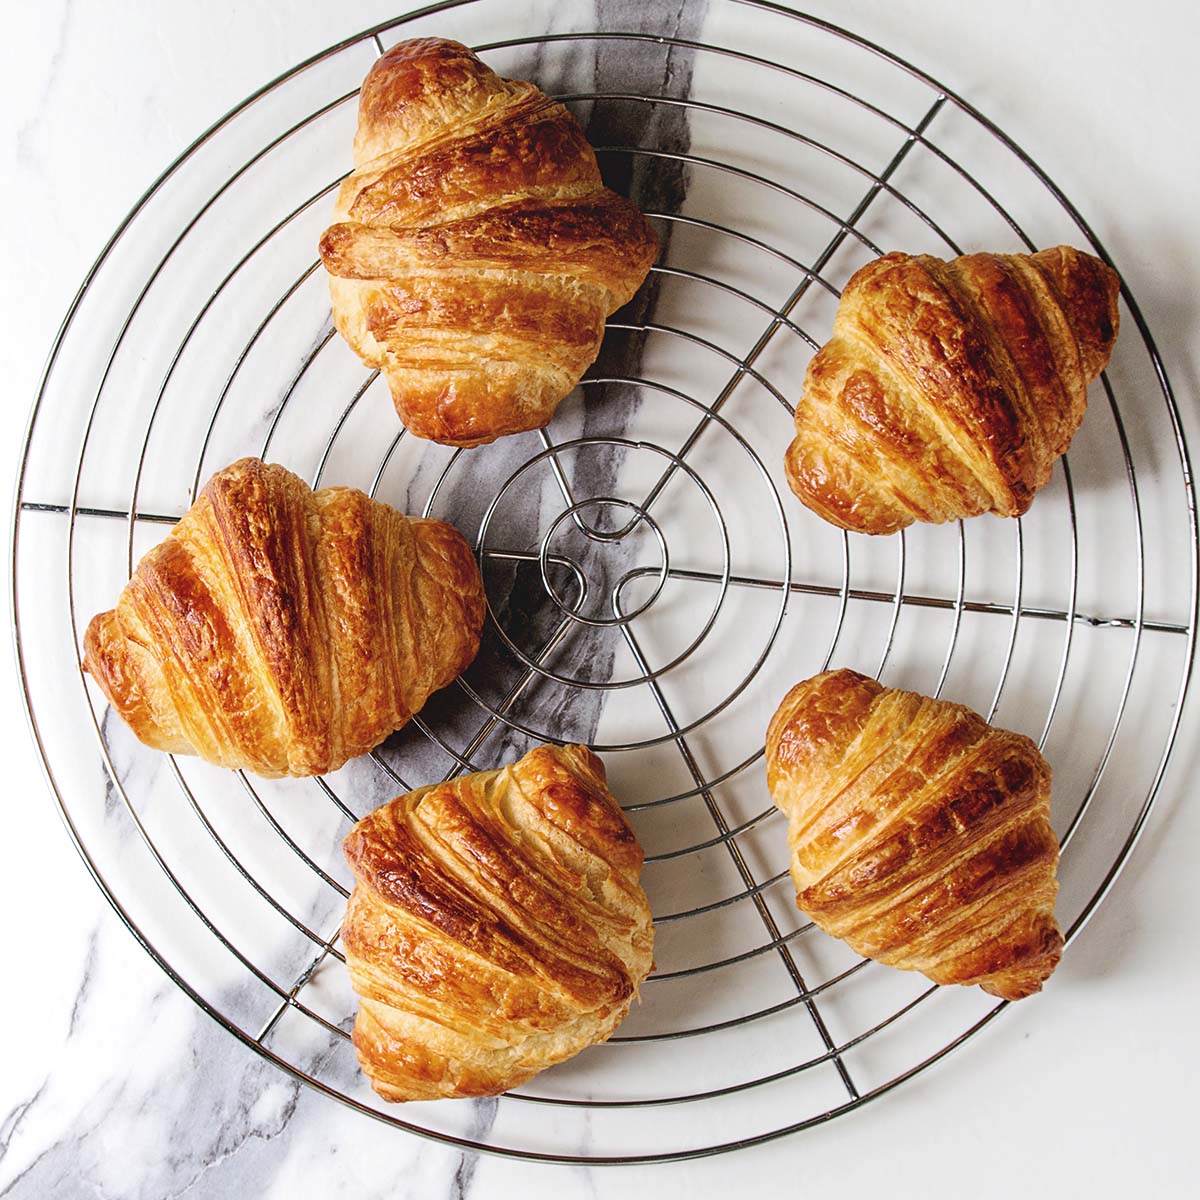 For long-term storage, freezing is your best bet. Just bear in mind that the longer croissants freeze, the worse they get when it comes to taste and texture.